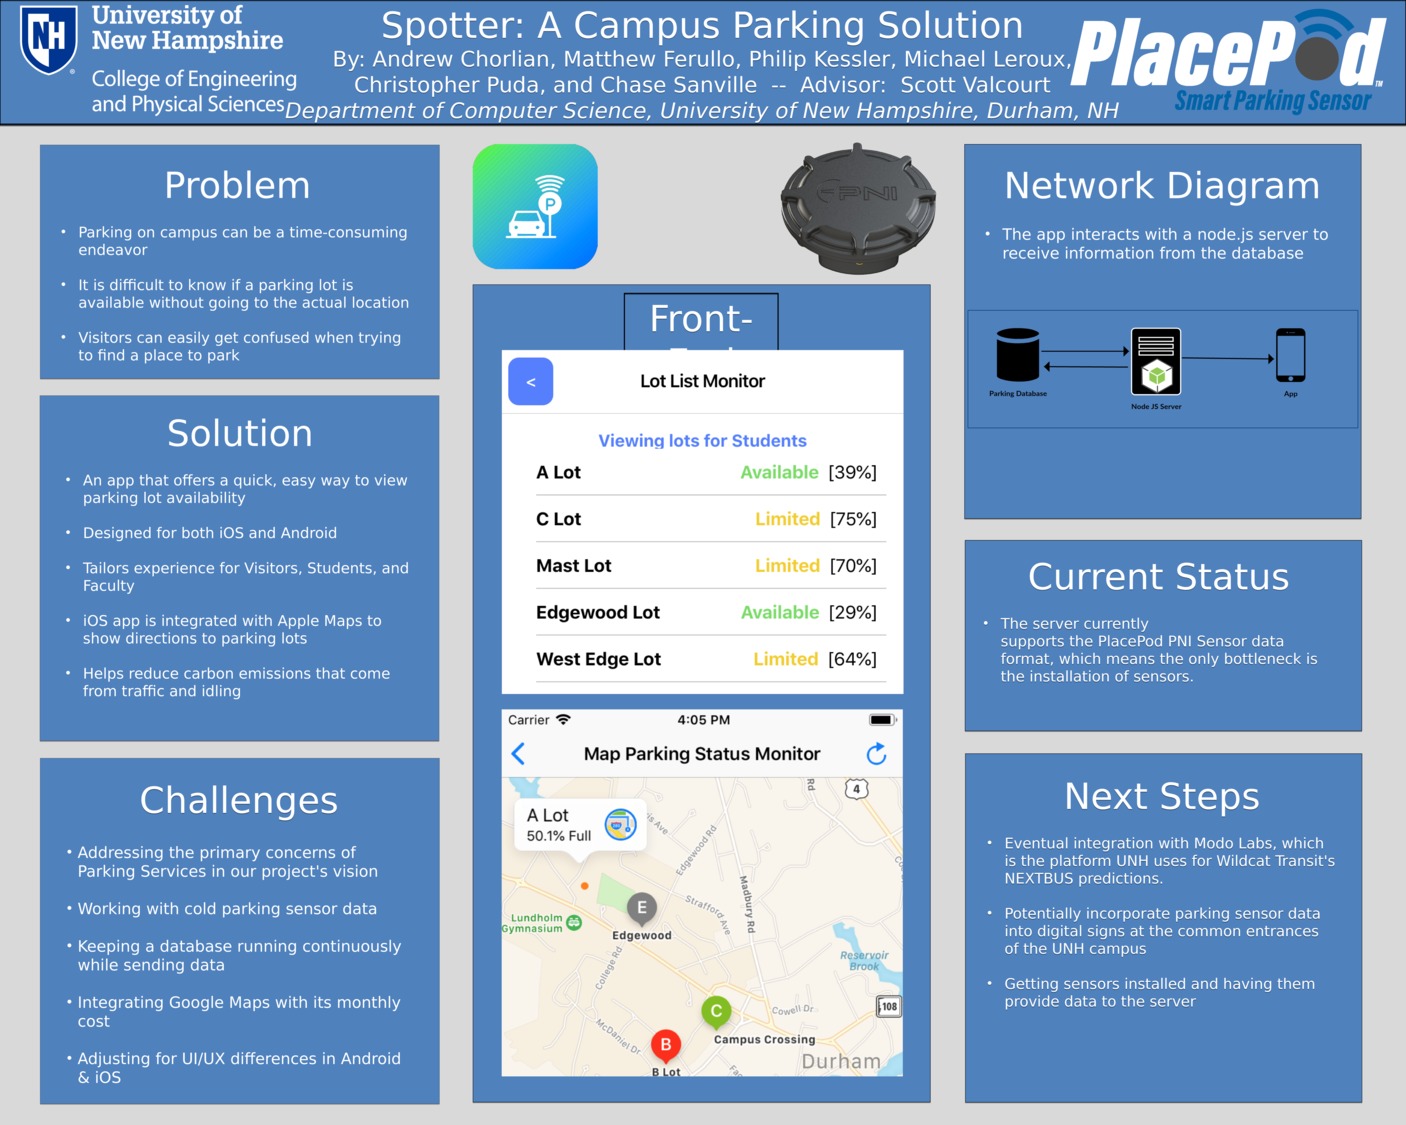 Spotter: A Campus Parking Solution by crp1003